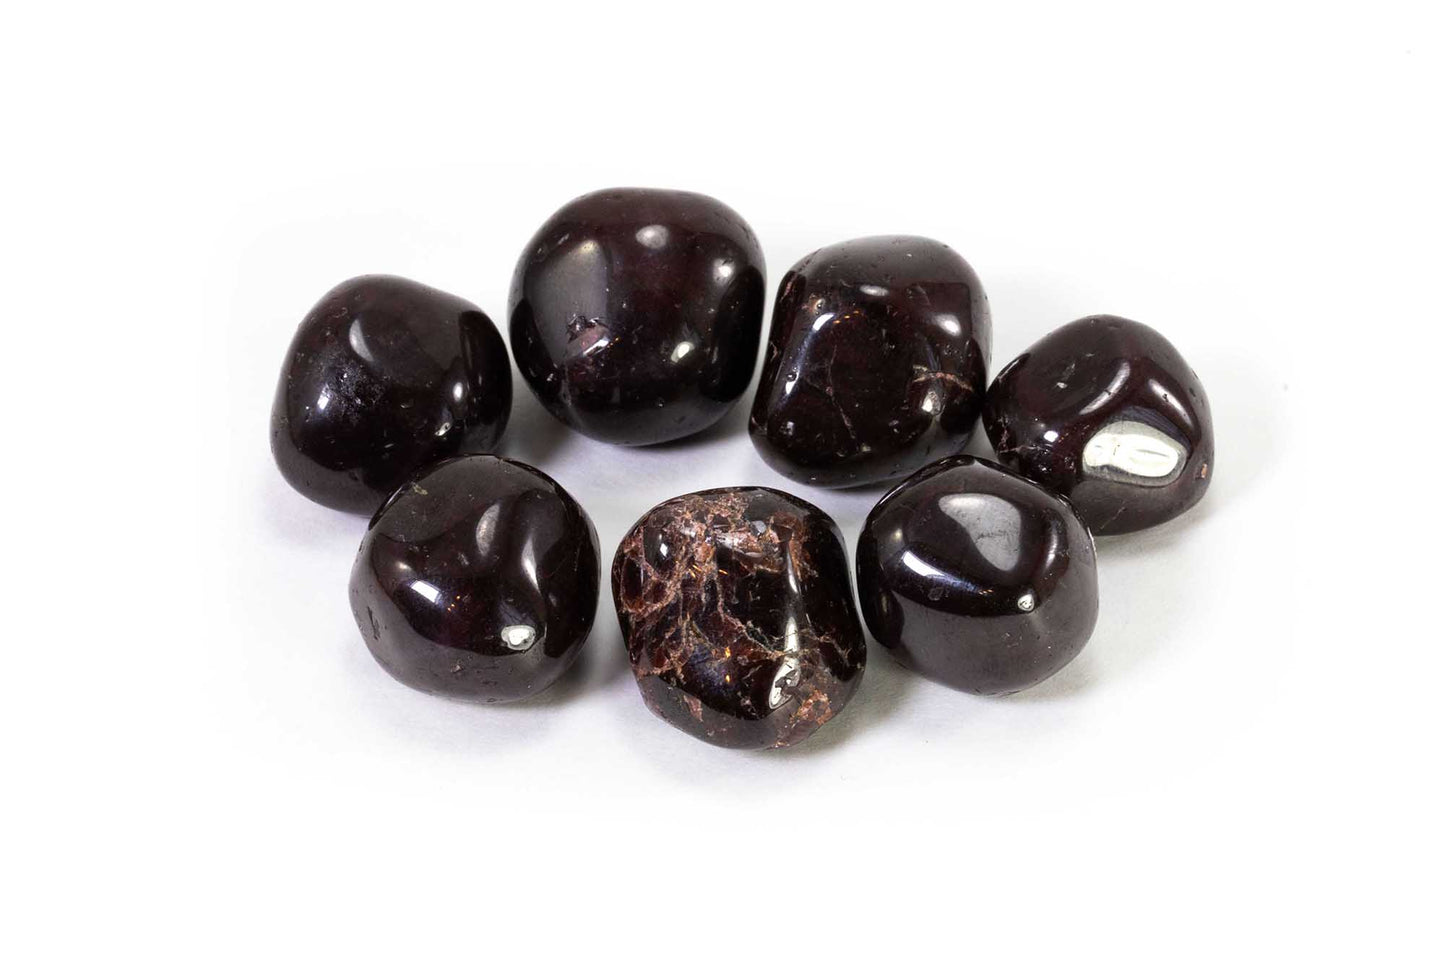 Garnet Tumbled Stones- Garnet- Increases Feelings Of Support And Joy | Self Worth | Releases Panic Worry And Anxiety | Reproductive Health